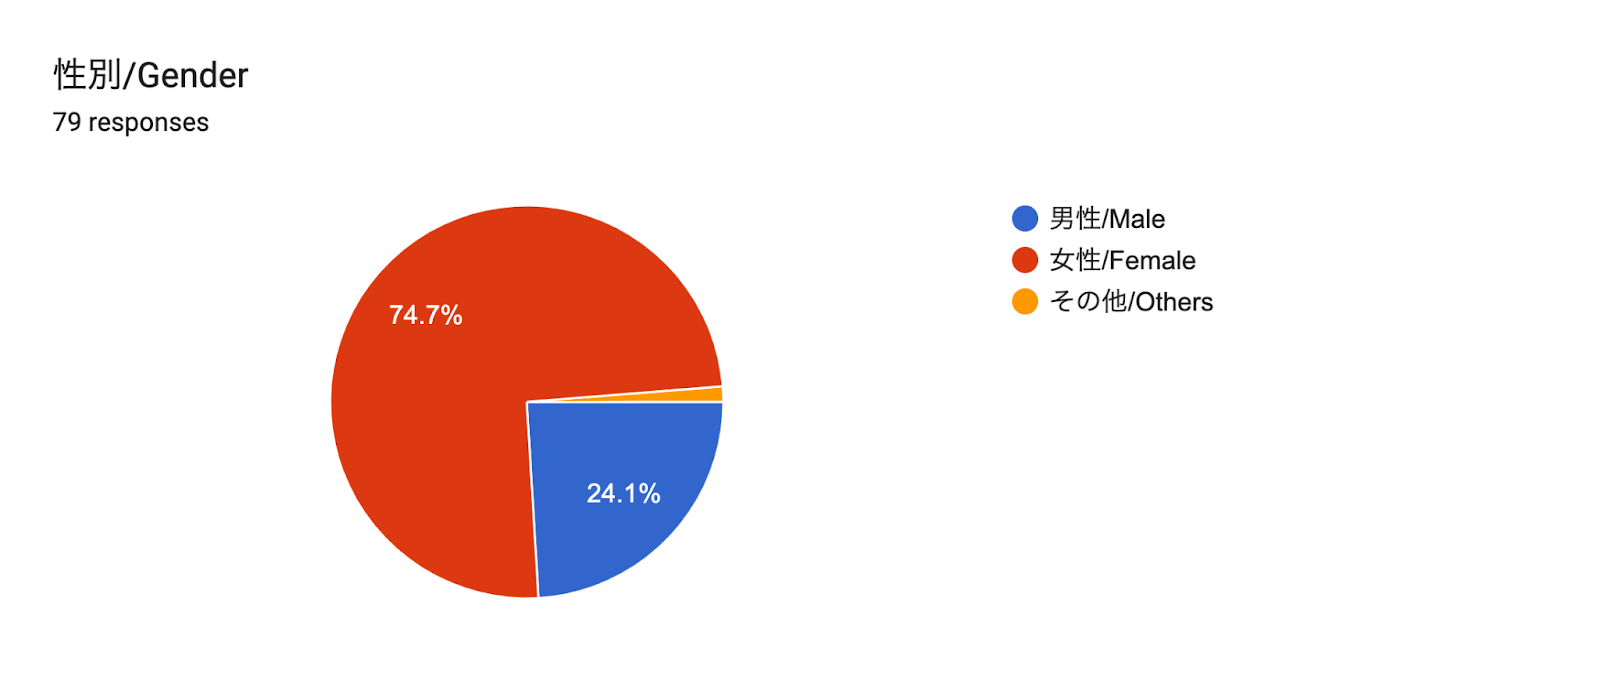 Forms response chart. Question title: 性別/Gender. Number of responses: 79 responses.